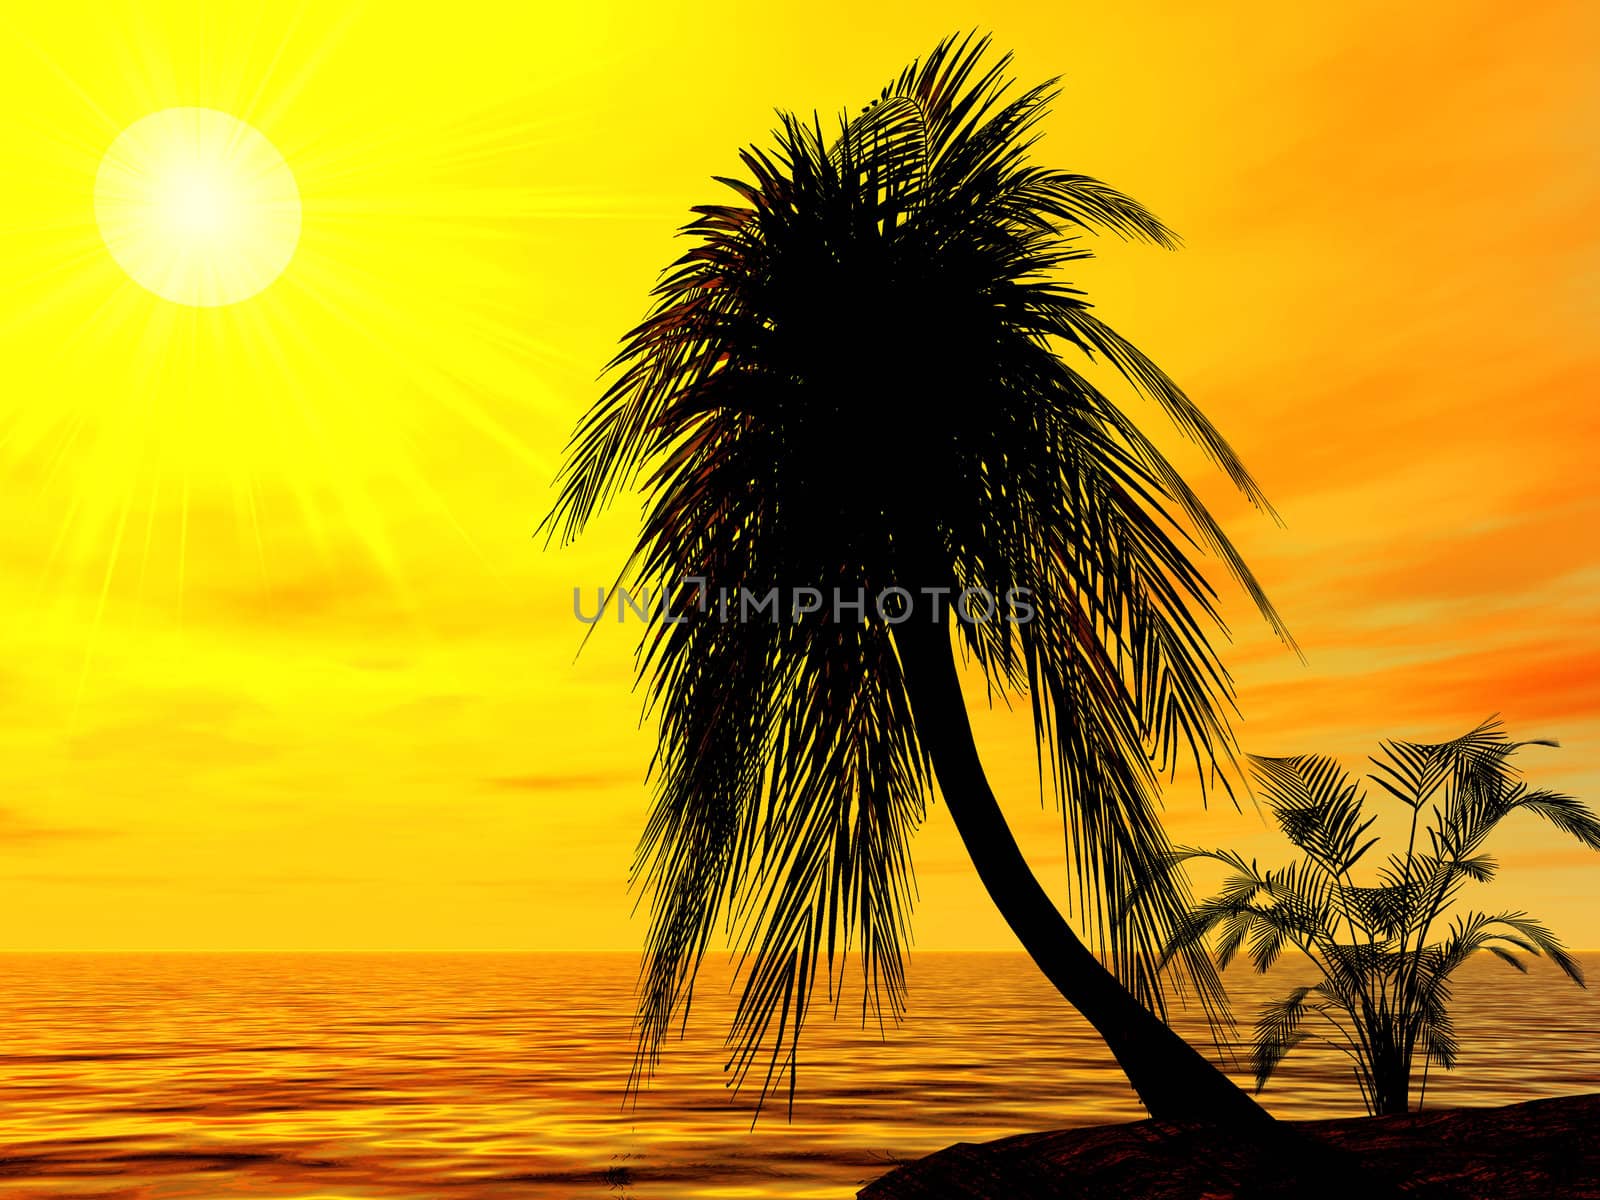 single palm on the uninhabited island on a brightly sunset by Serp